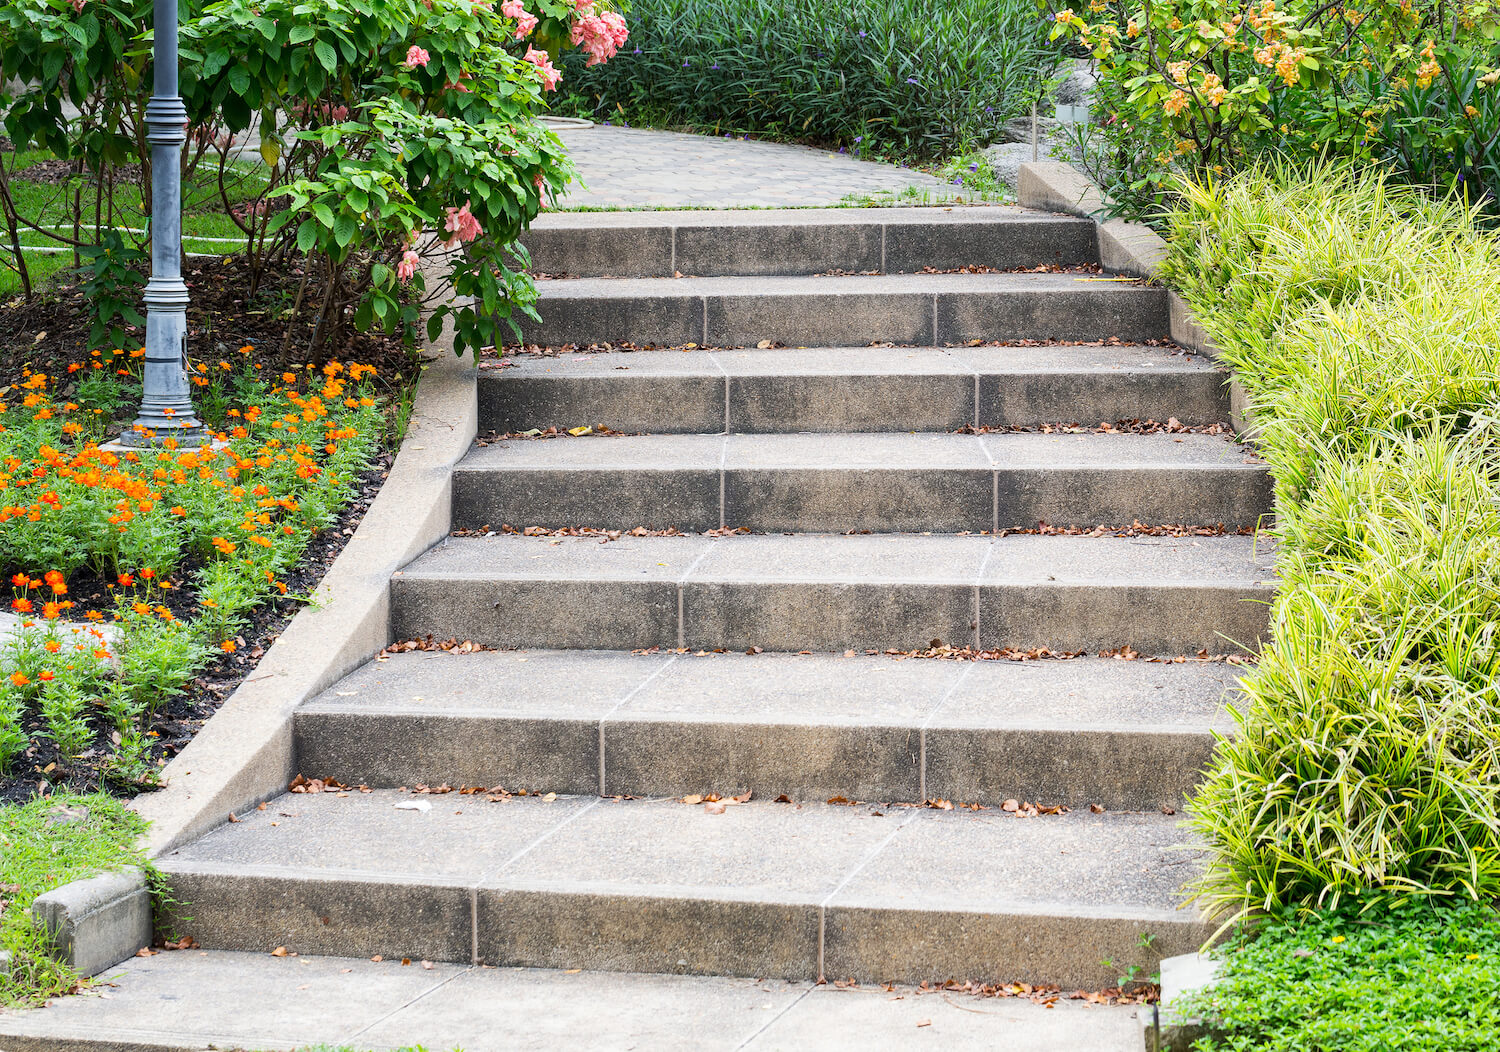 How You Can Add Serious Curb Appeal to Your Home With Paver Stone Steps